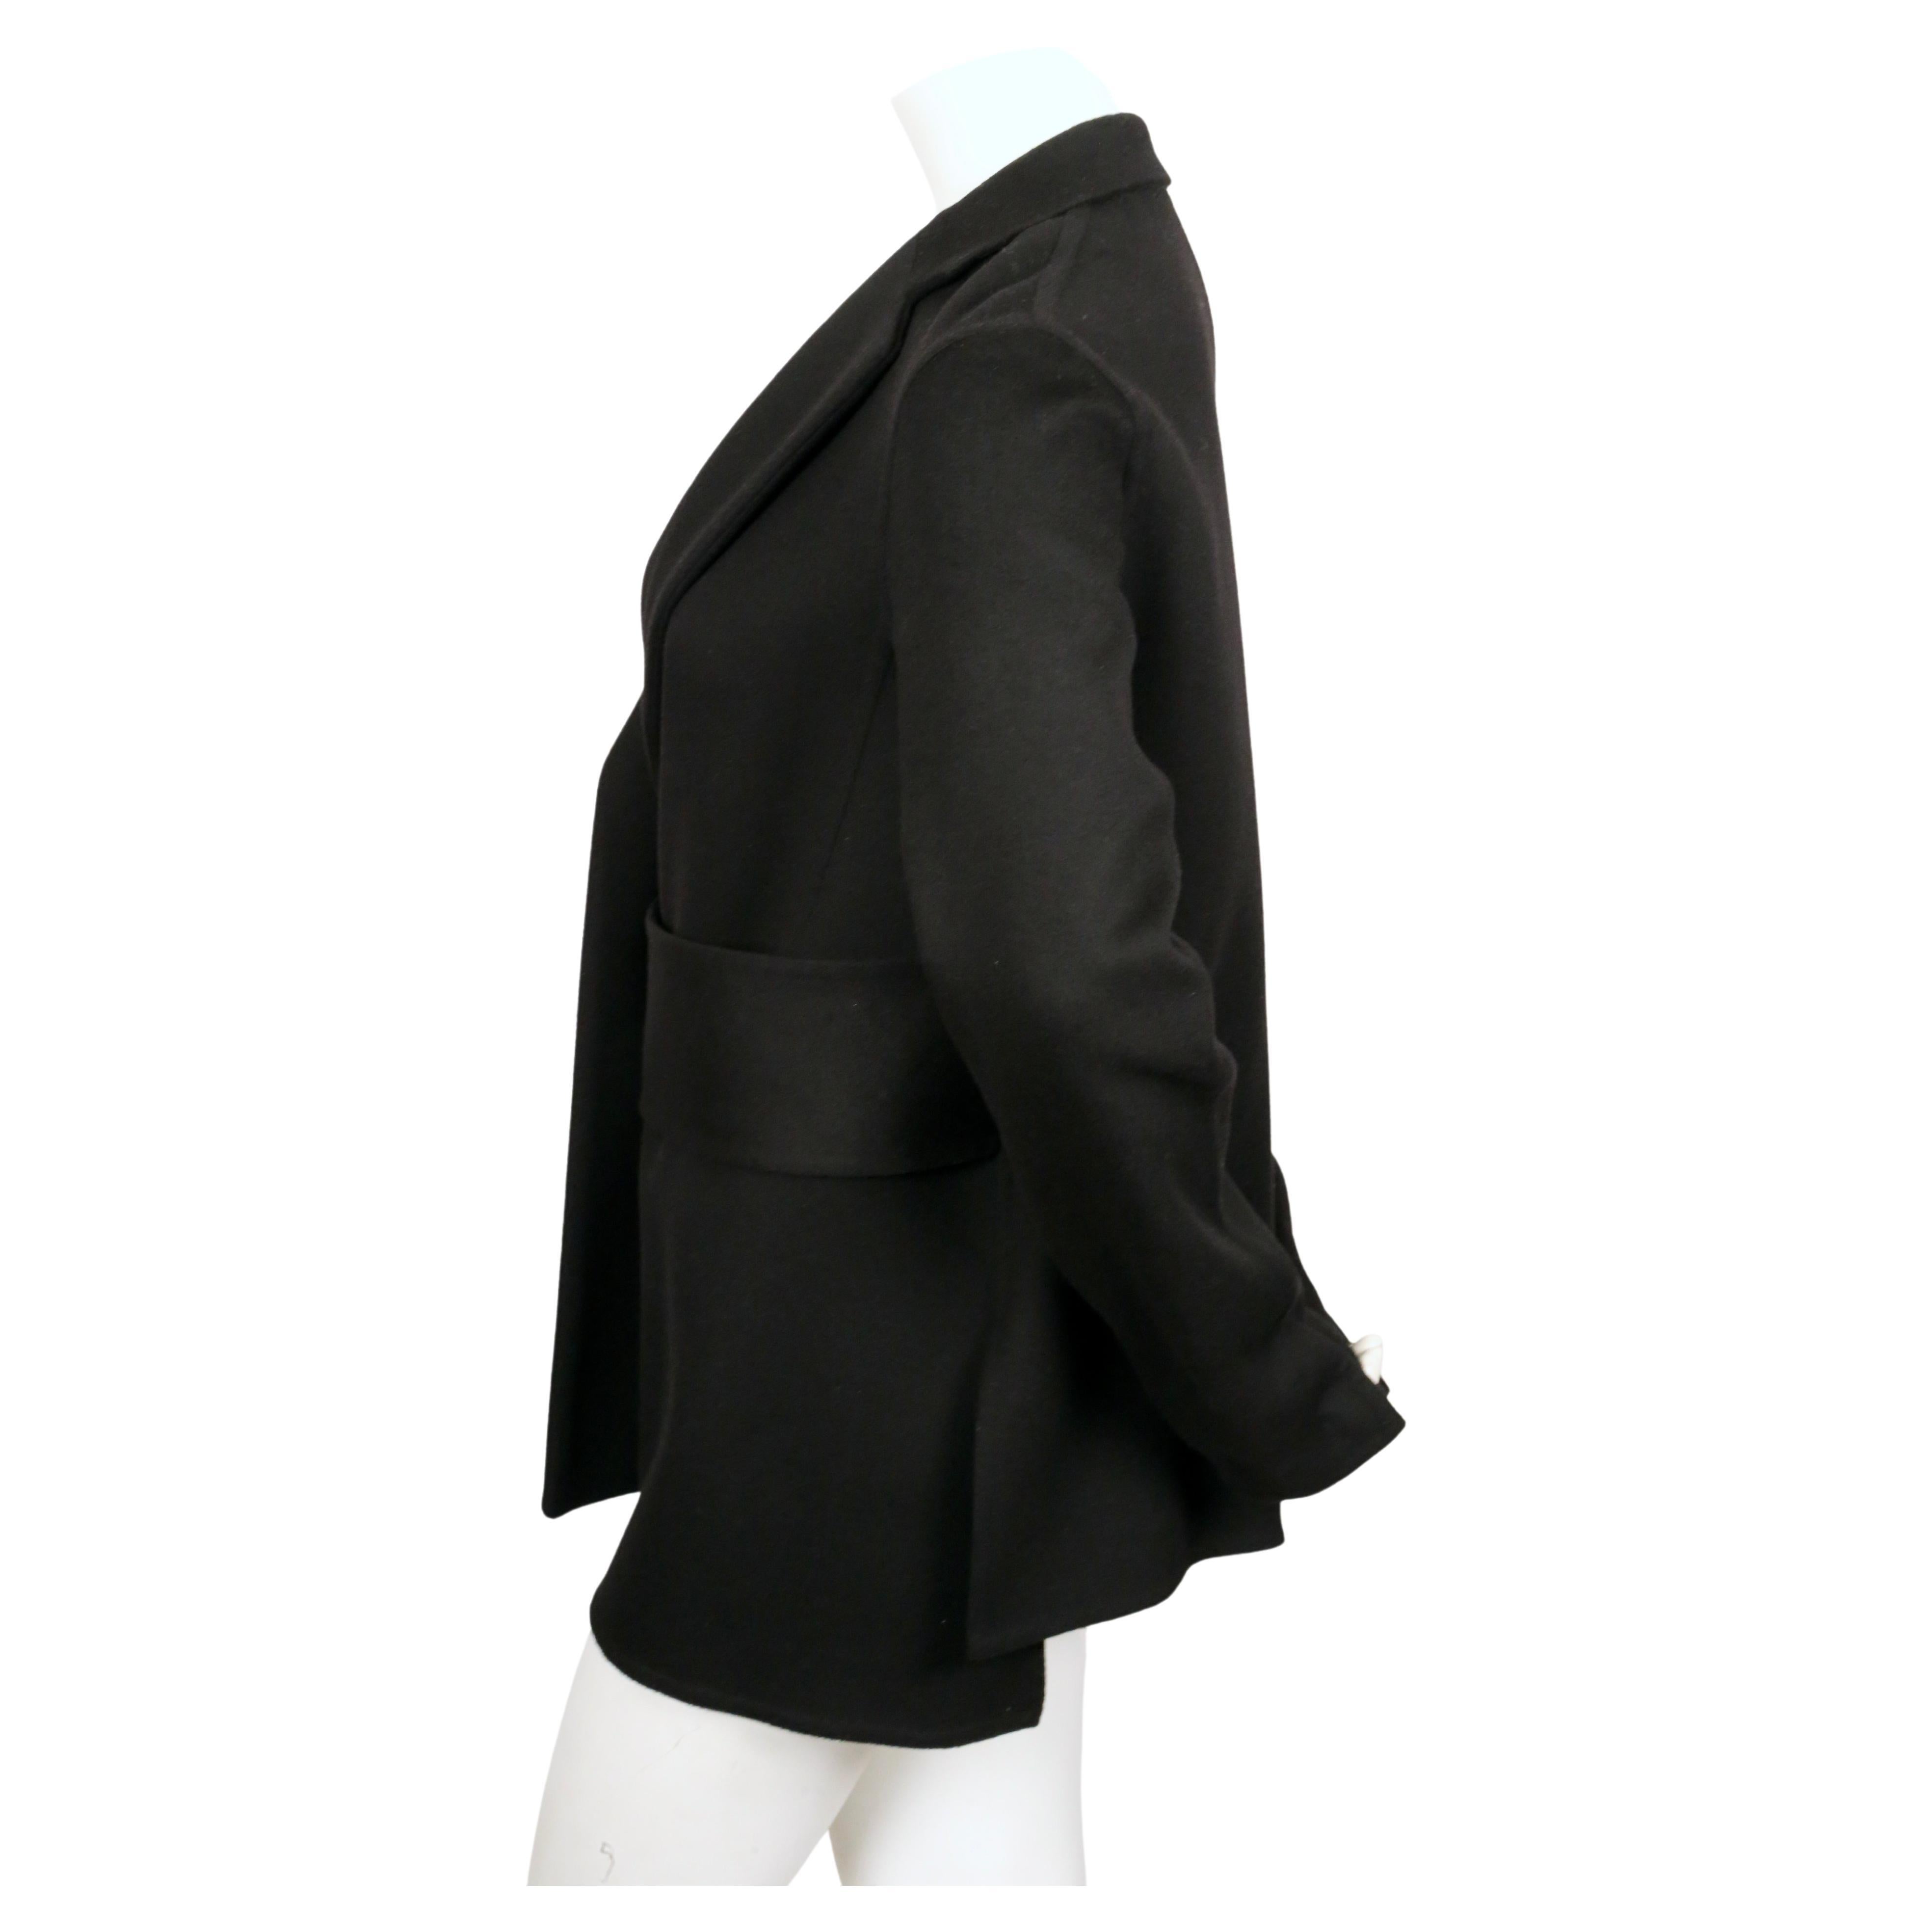 CELINE by PHOEBE PHILO black wool and cashmere jacket with asymmetrical belt For Sale 3